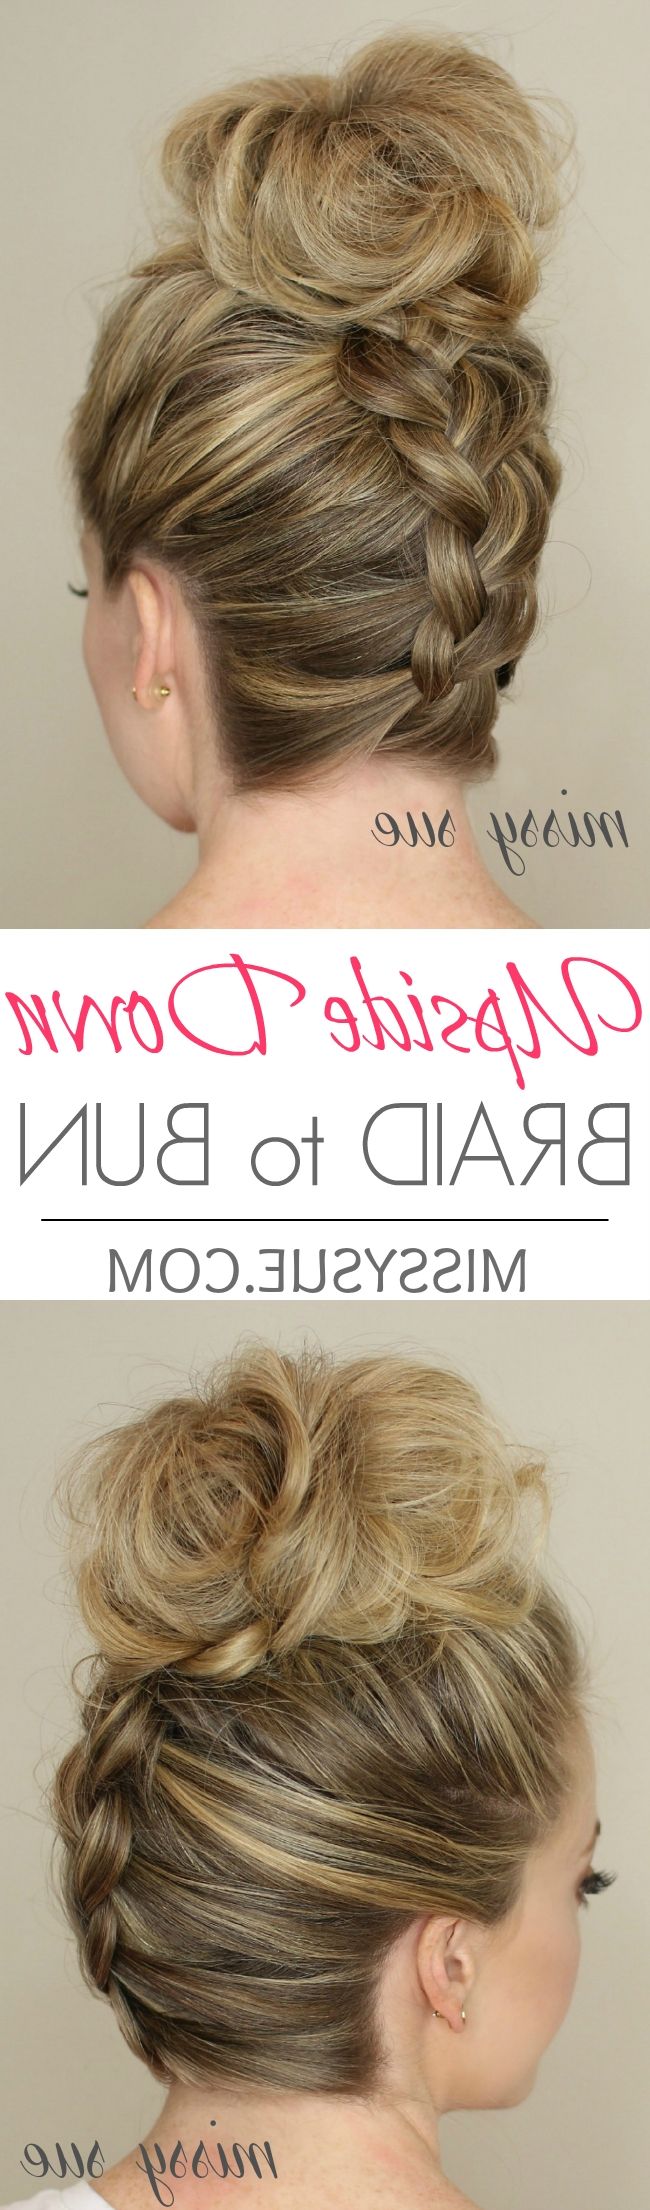 Upside Down Braid To Bun Throughout Most Up To Date Messy Flipped Braid And Bun Hairstyles (View 9 of 15)